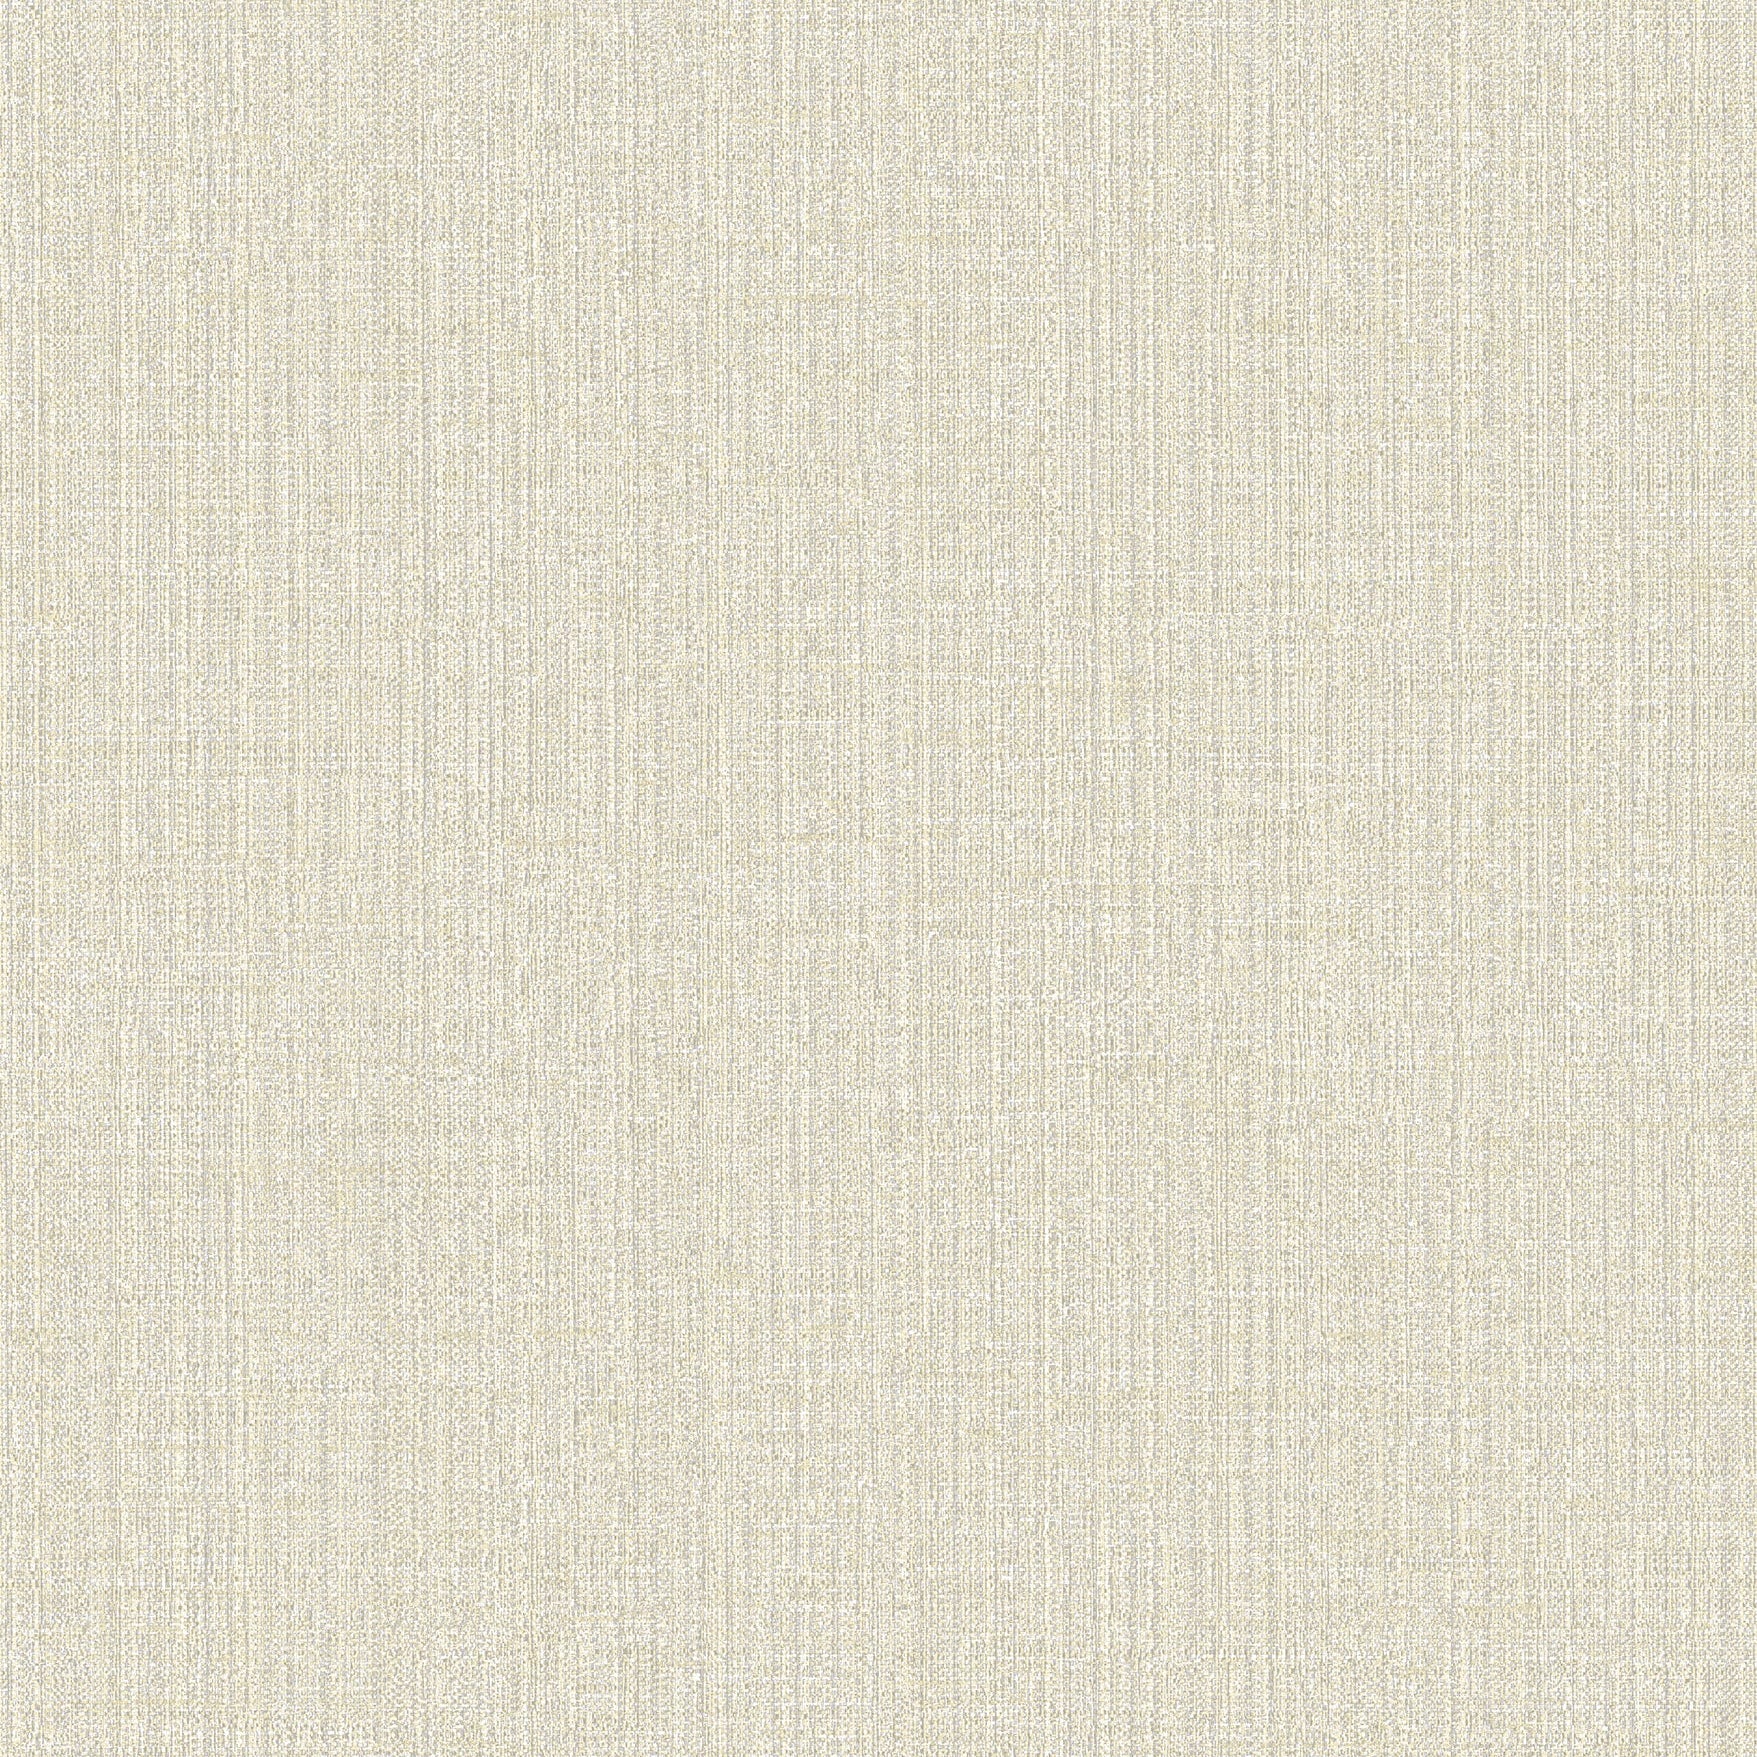 Find 2767-003364 Beiene Wheat Weave Techniques & Finishes III Brewster